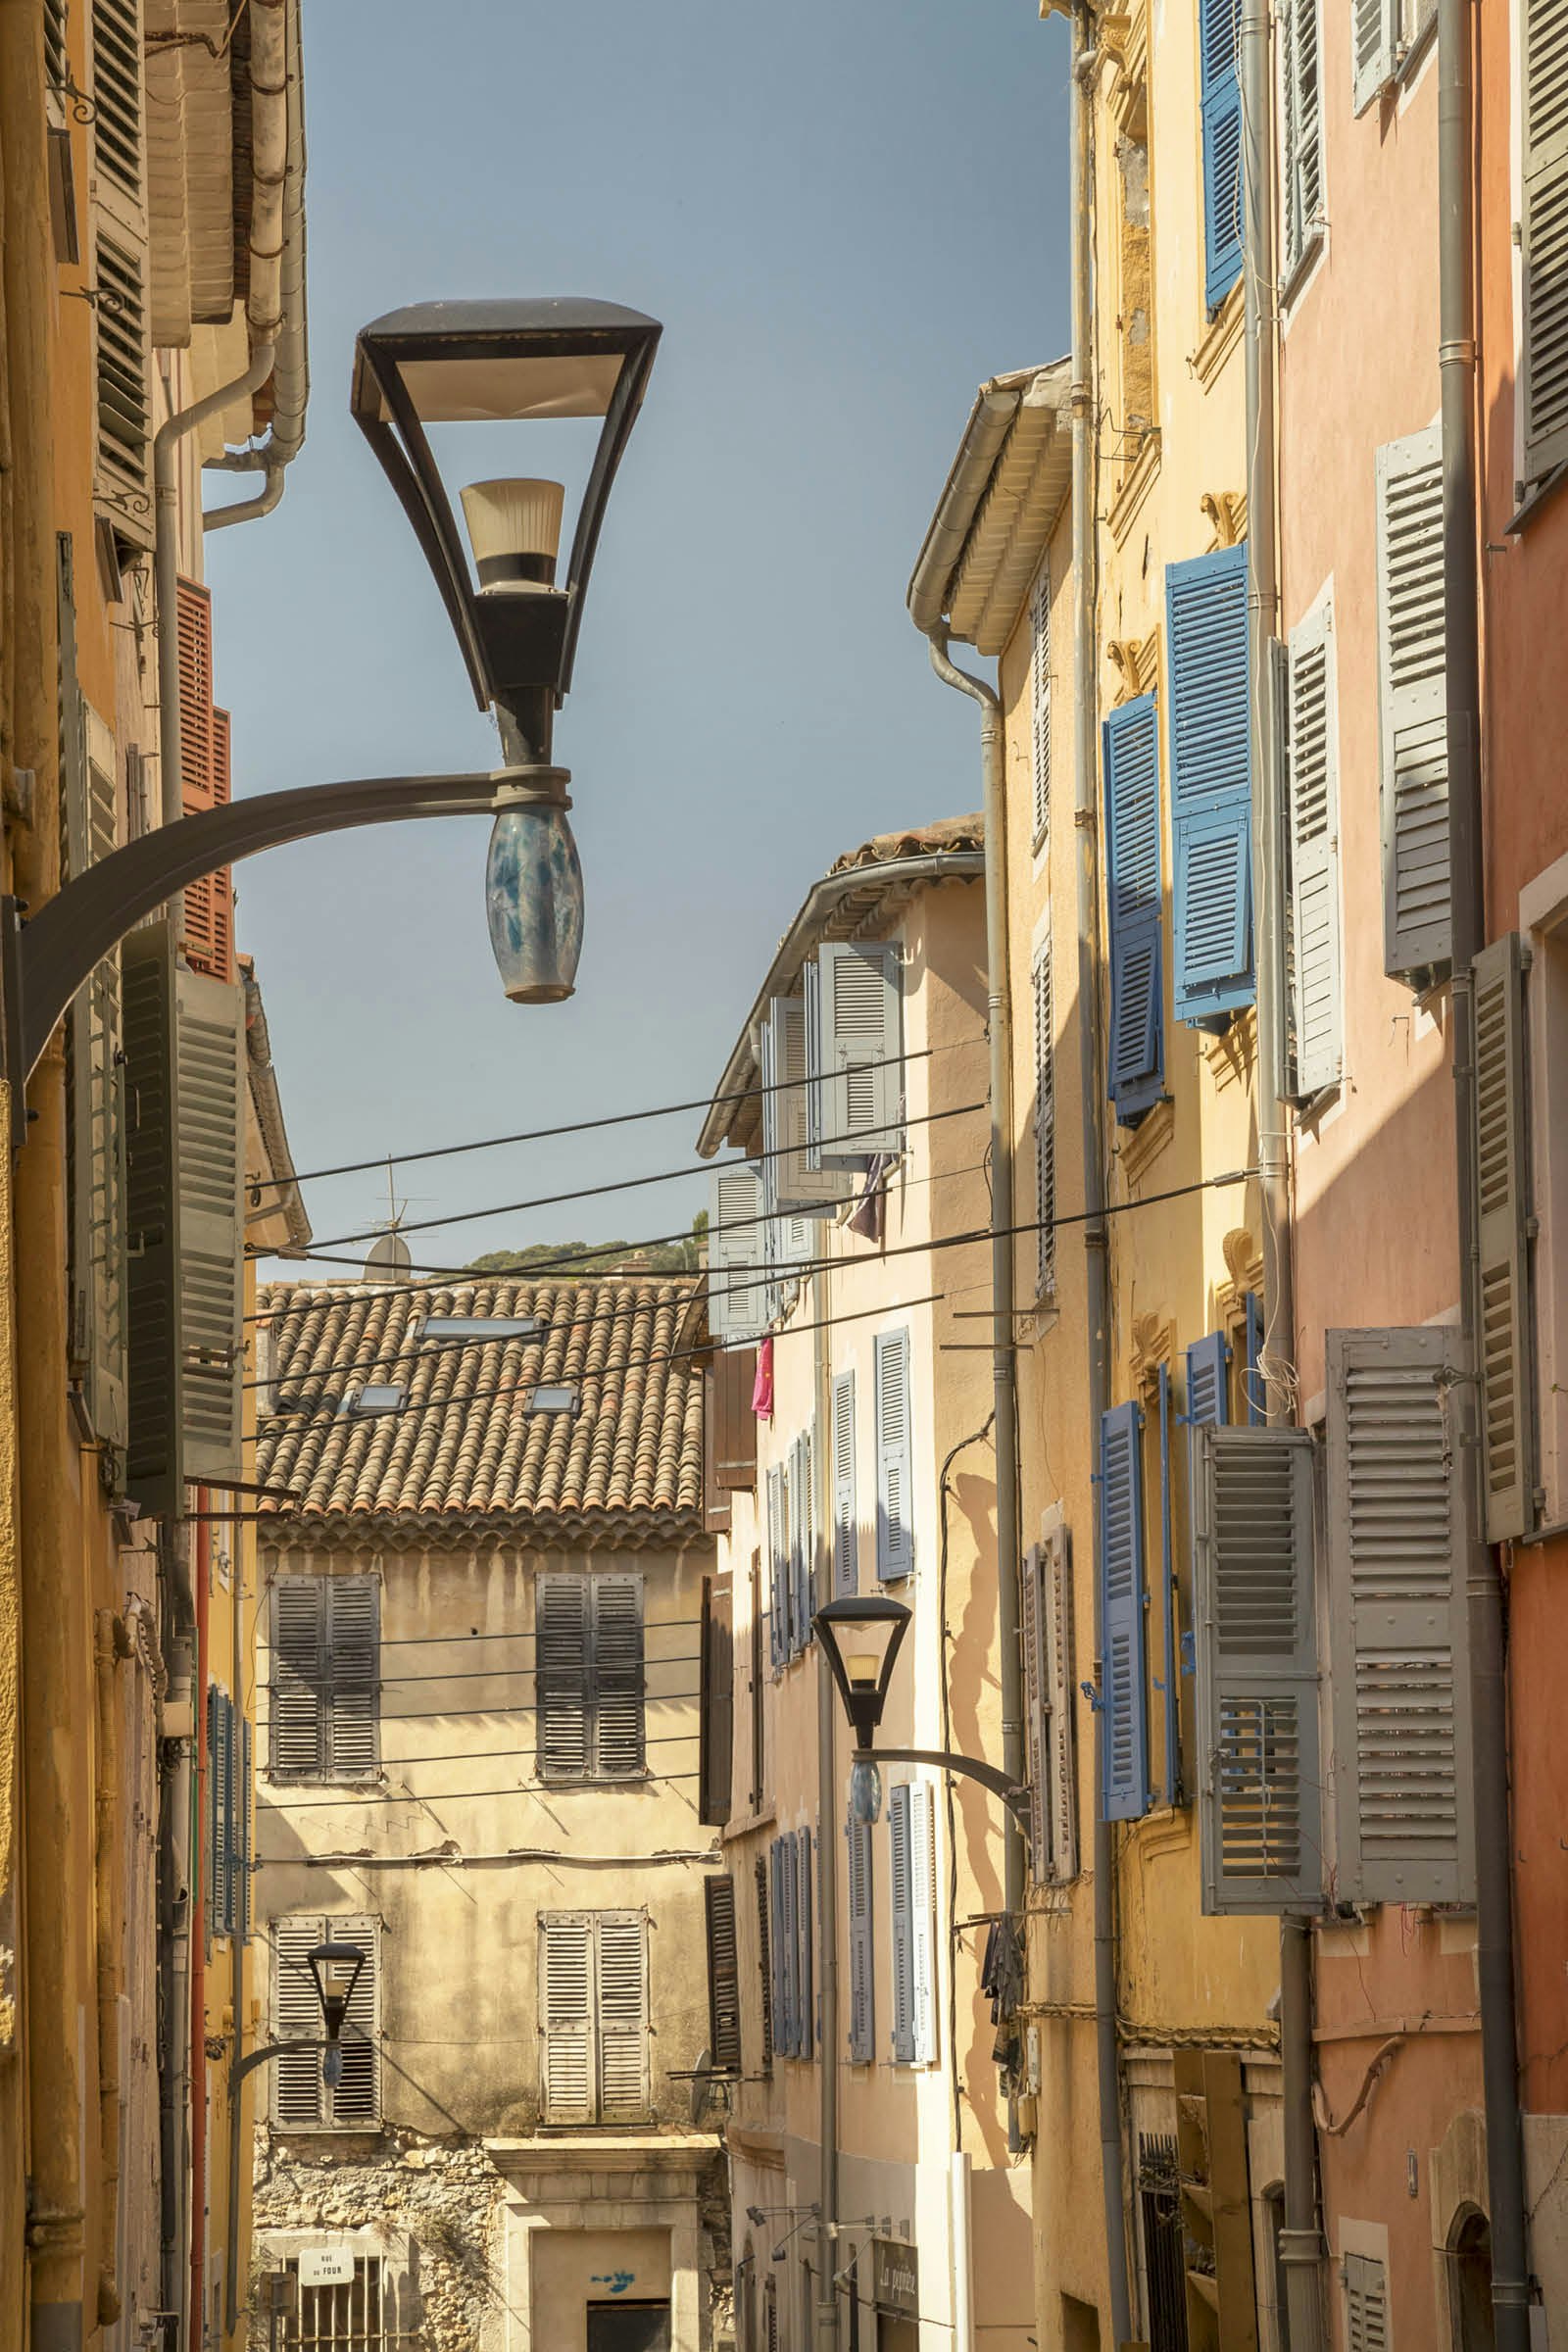 A bright day on a backstreet in the Côte d'Azur town of Vallauris